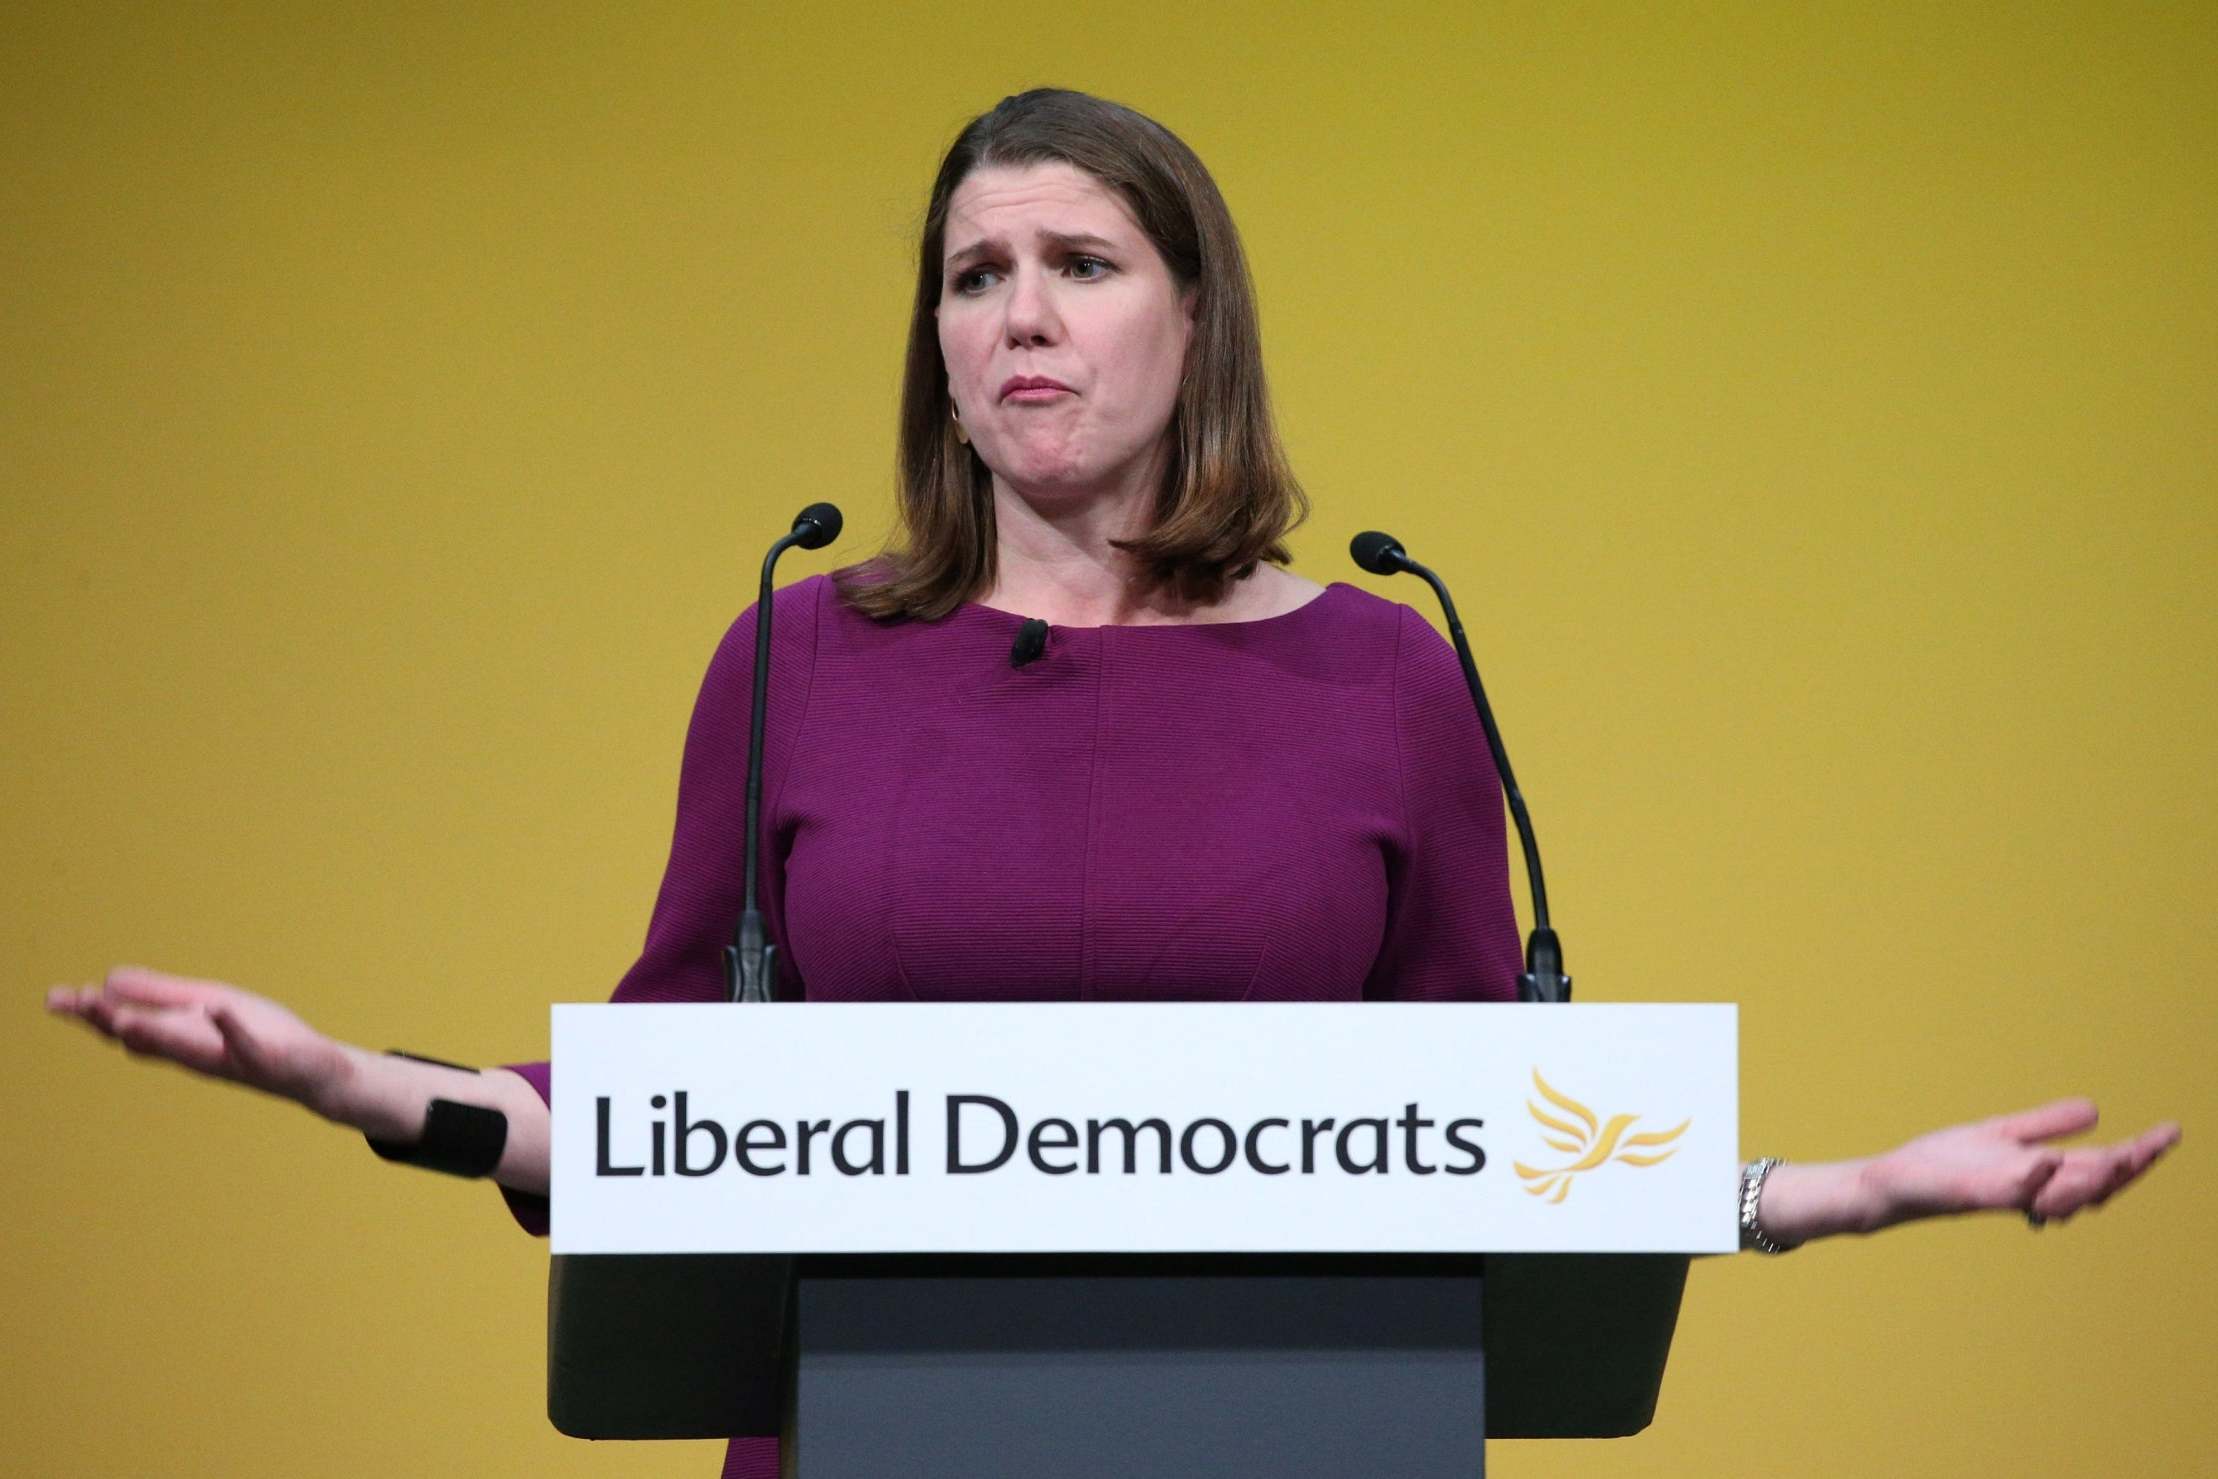 Could the Lib Dems really avoid doing a deal with other parties after the election?